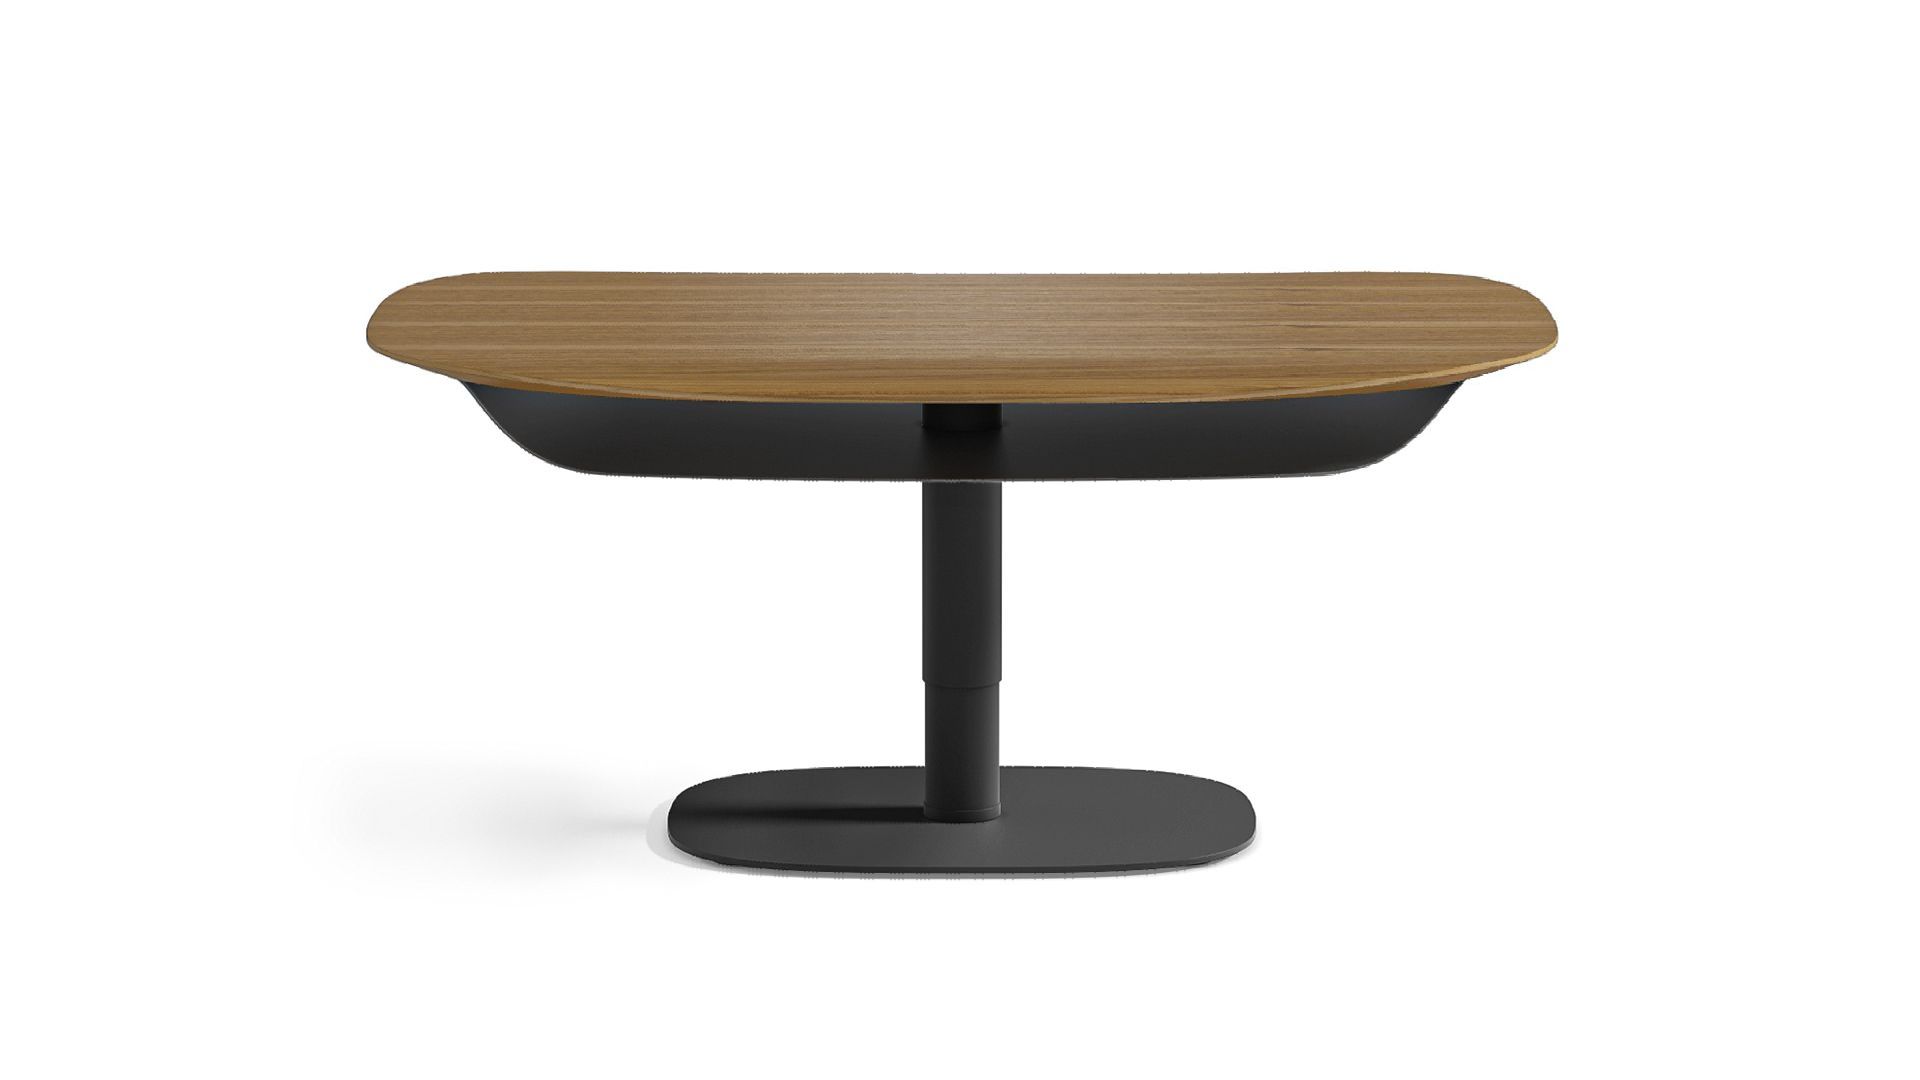 Soma tables